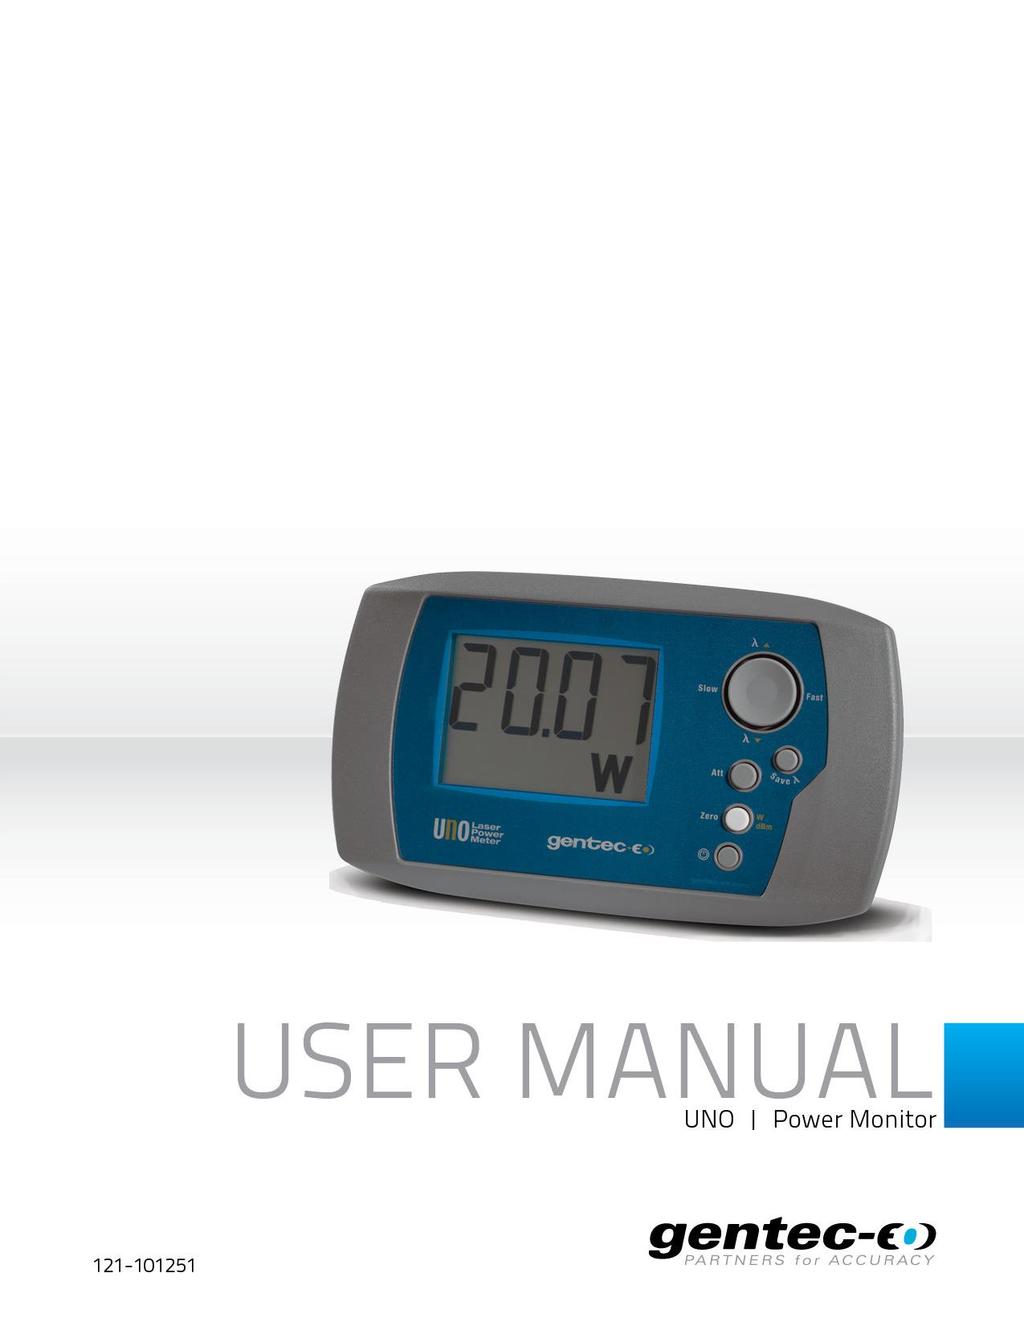 WARRANTY The Gentec-EO UNO Single Channel Laser Power Meter comes with a one-year warranty (from date of shipment) against material and/or workmanship defects, when used under normal operating